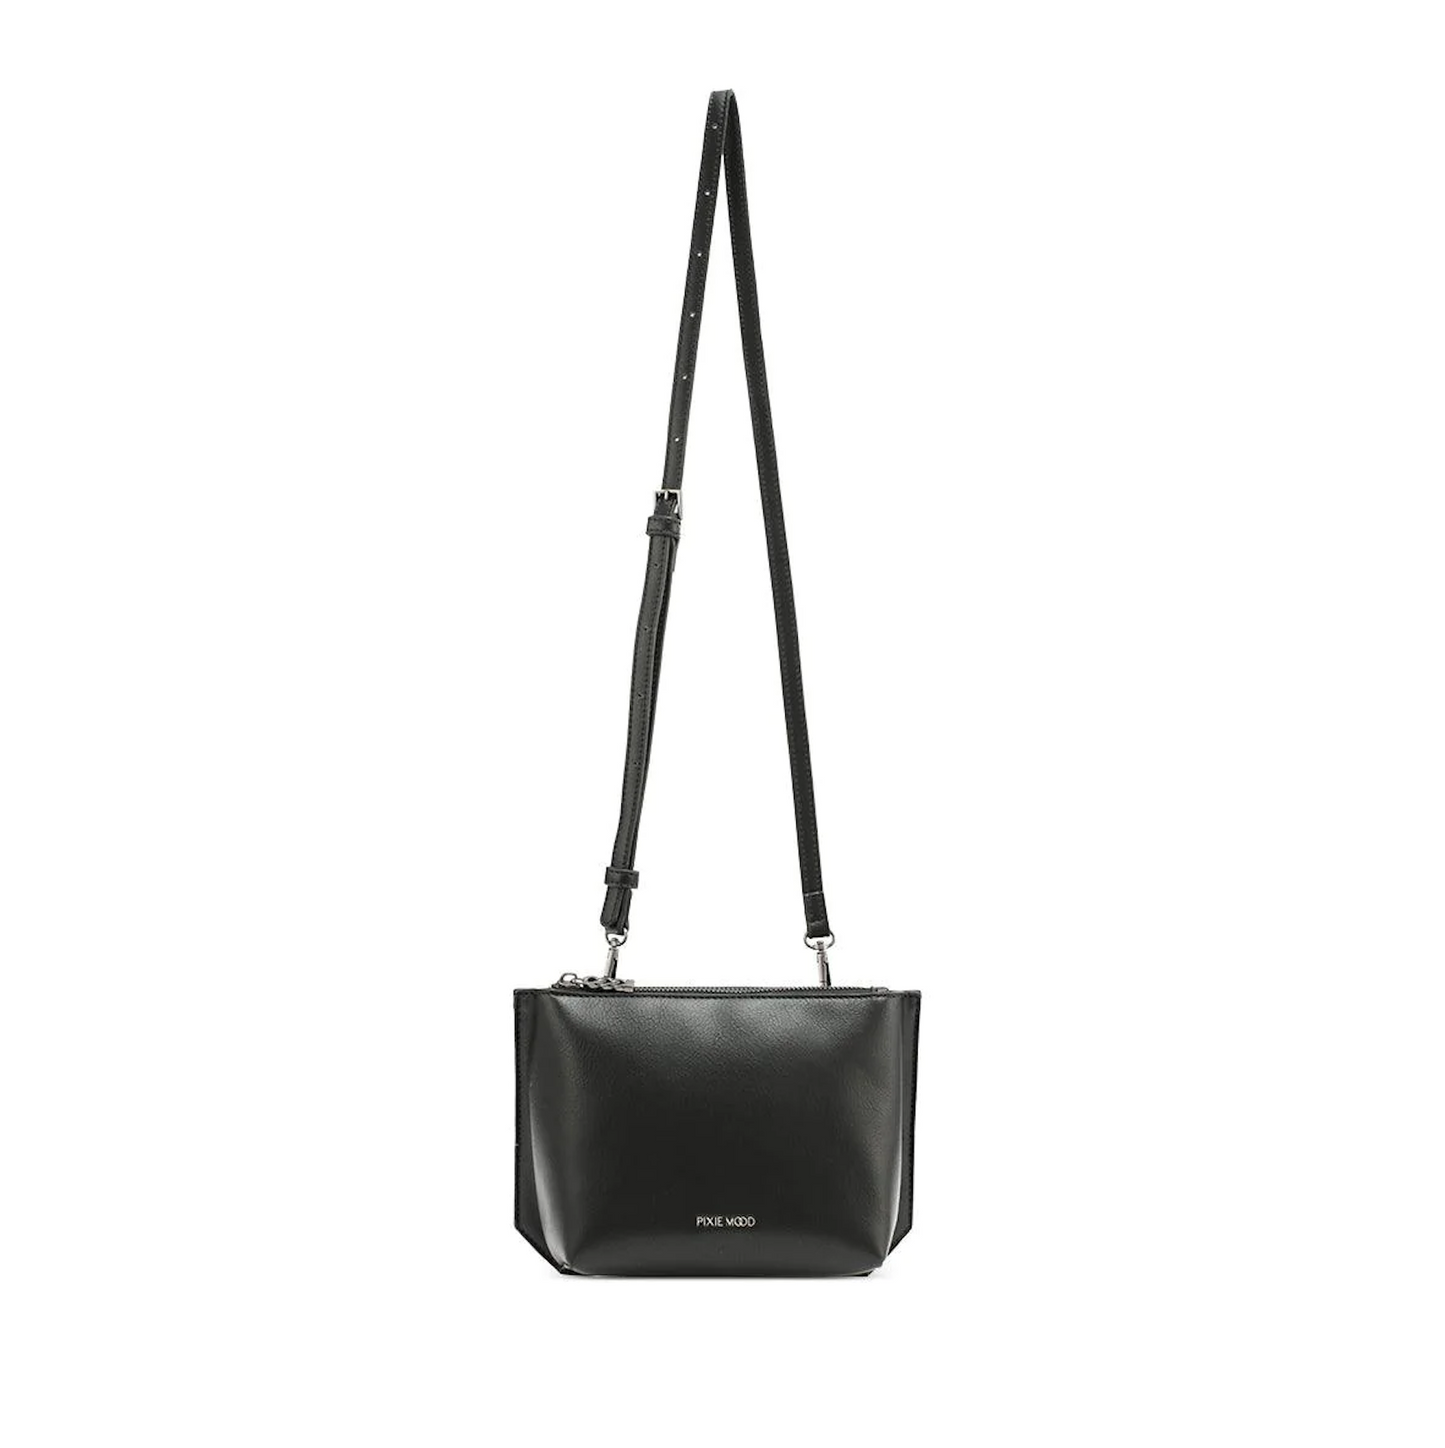 Everly Convertible Belt Bag by Pixie Mood